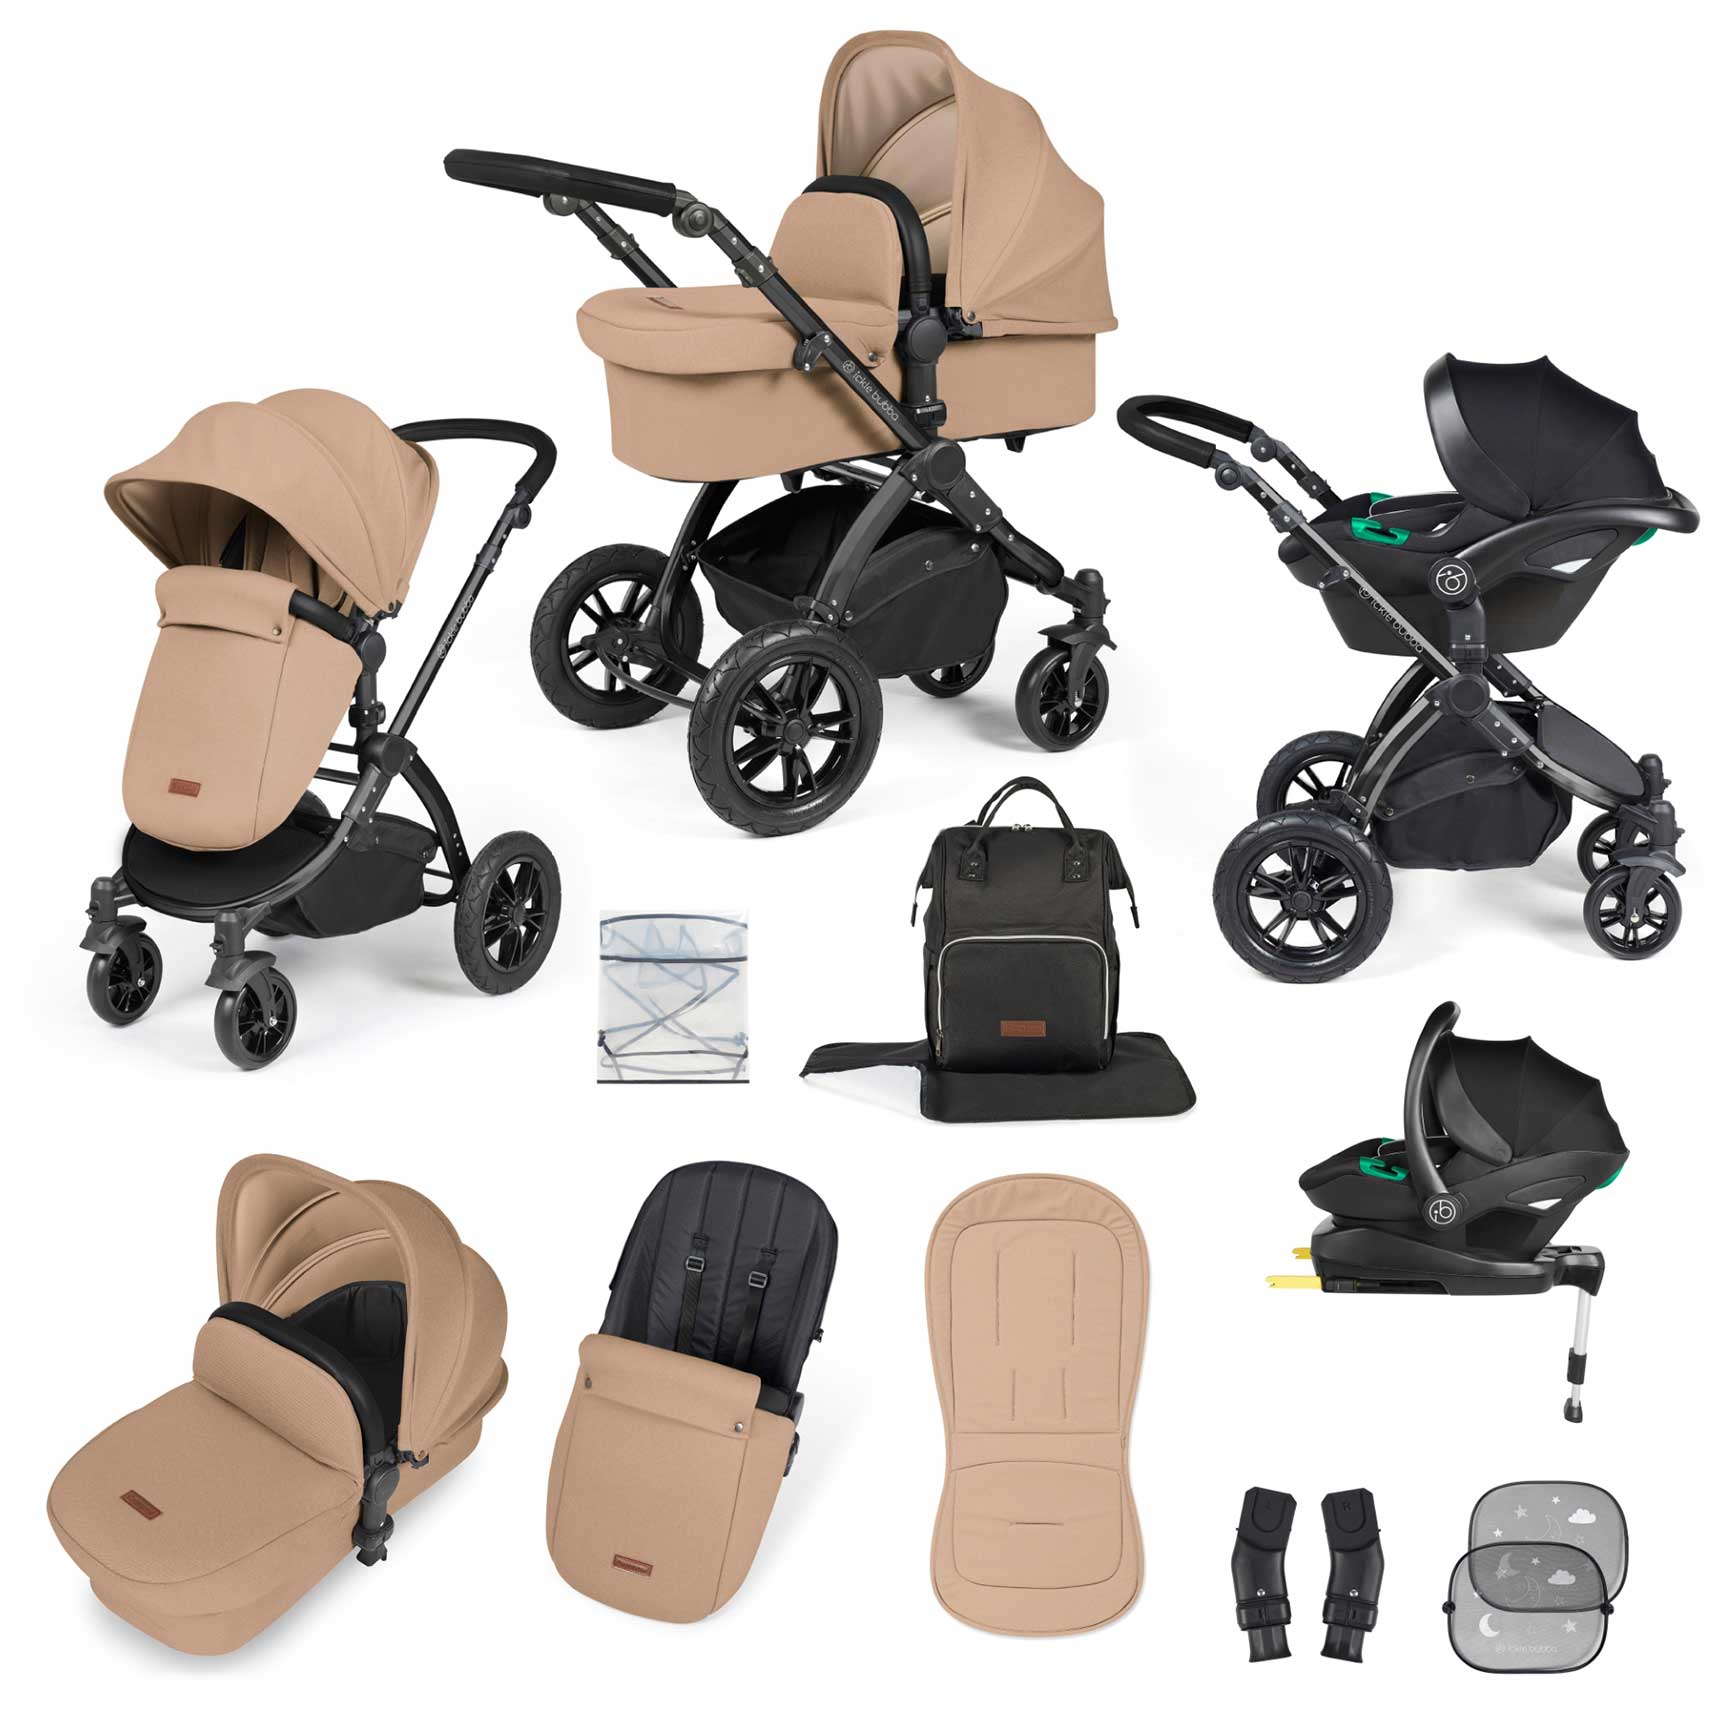 Ickle Bubba Stomp Luxe All-in-One Travel System with Isofix Base in Black/Desert/Black Travel Systems 10-011-300-208 5056515026498